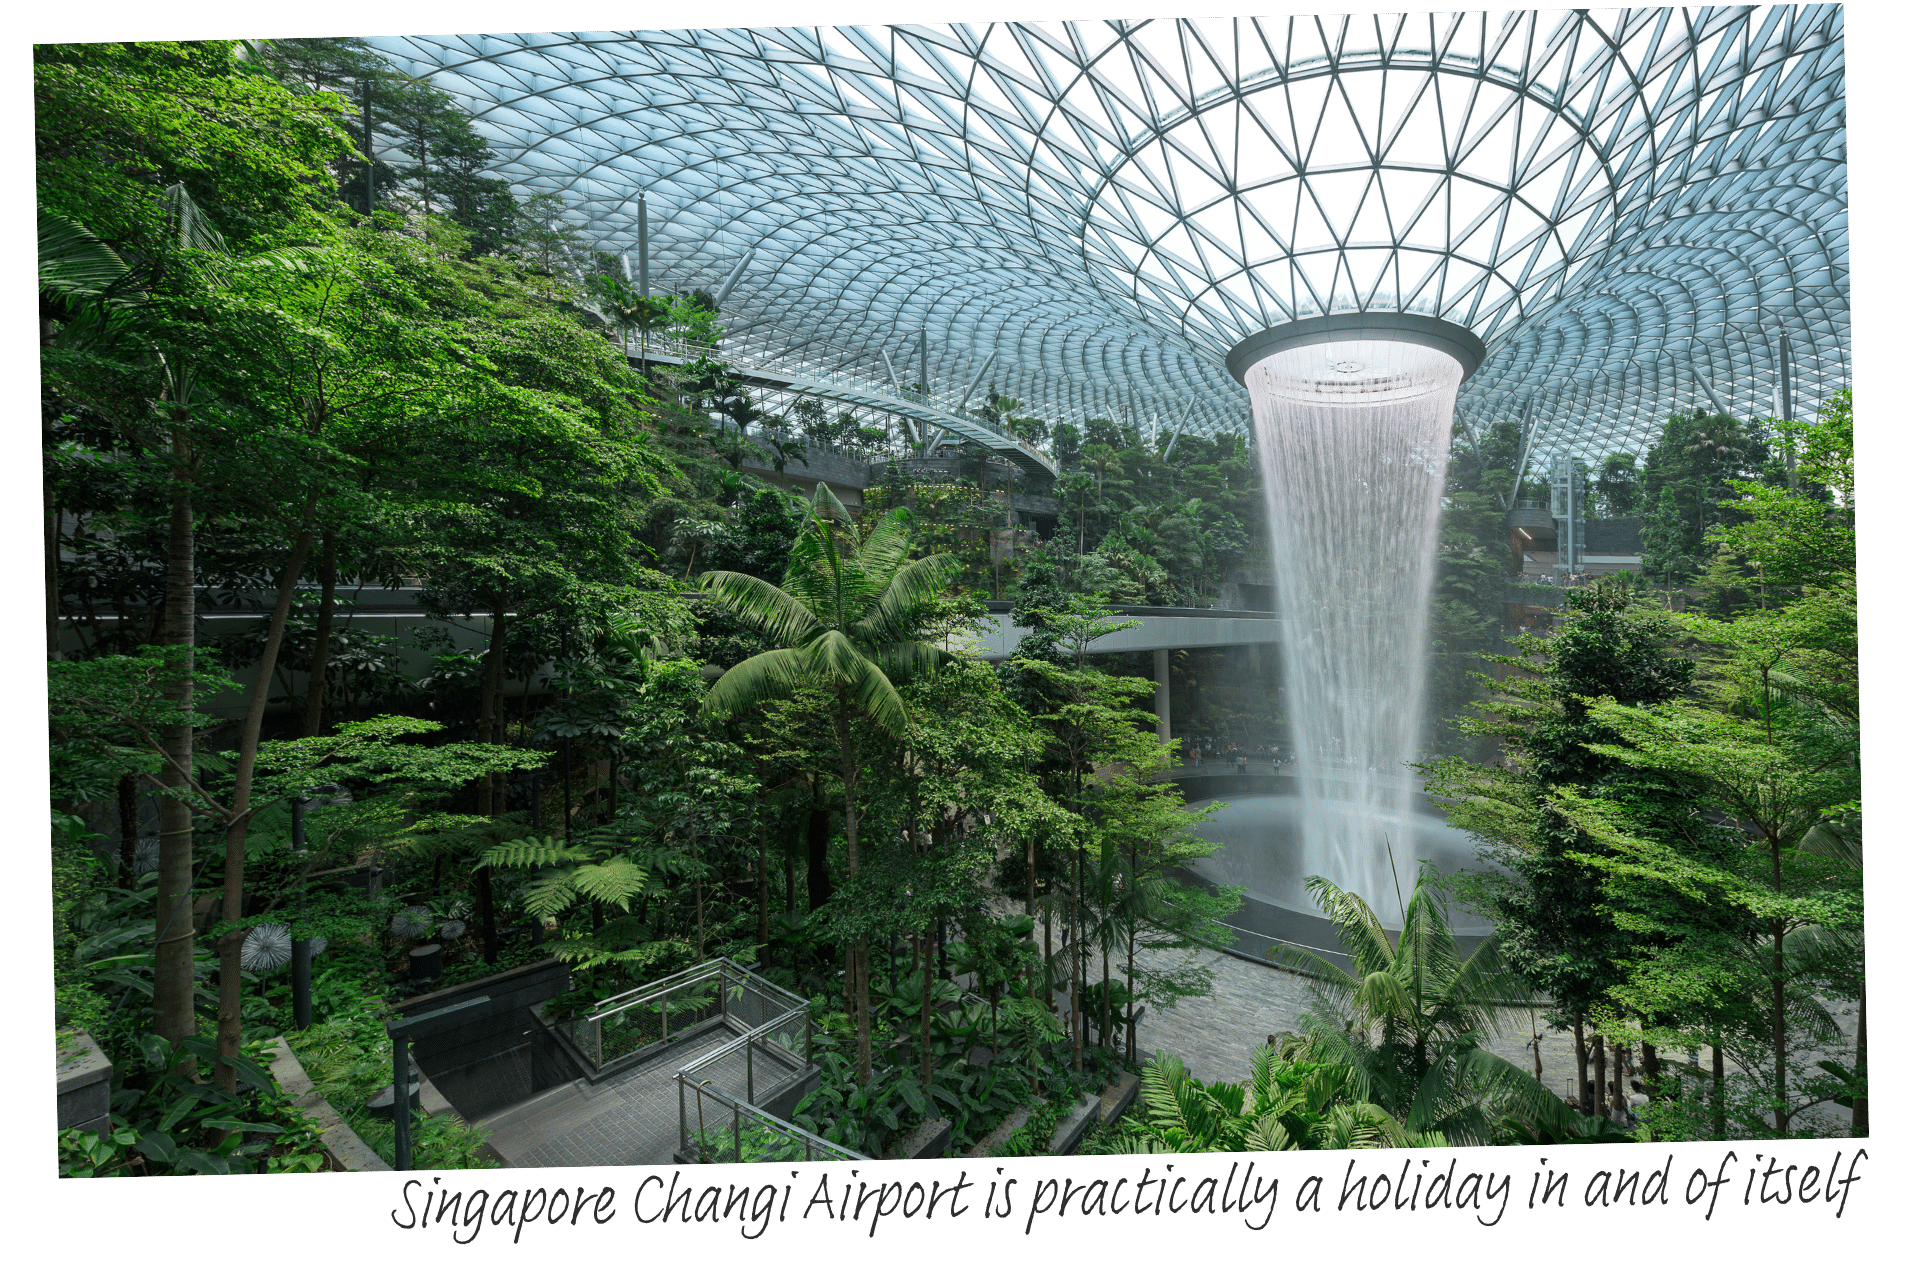 Singapore Changi Airport is one of the best airports for layovers